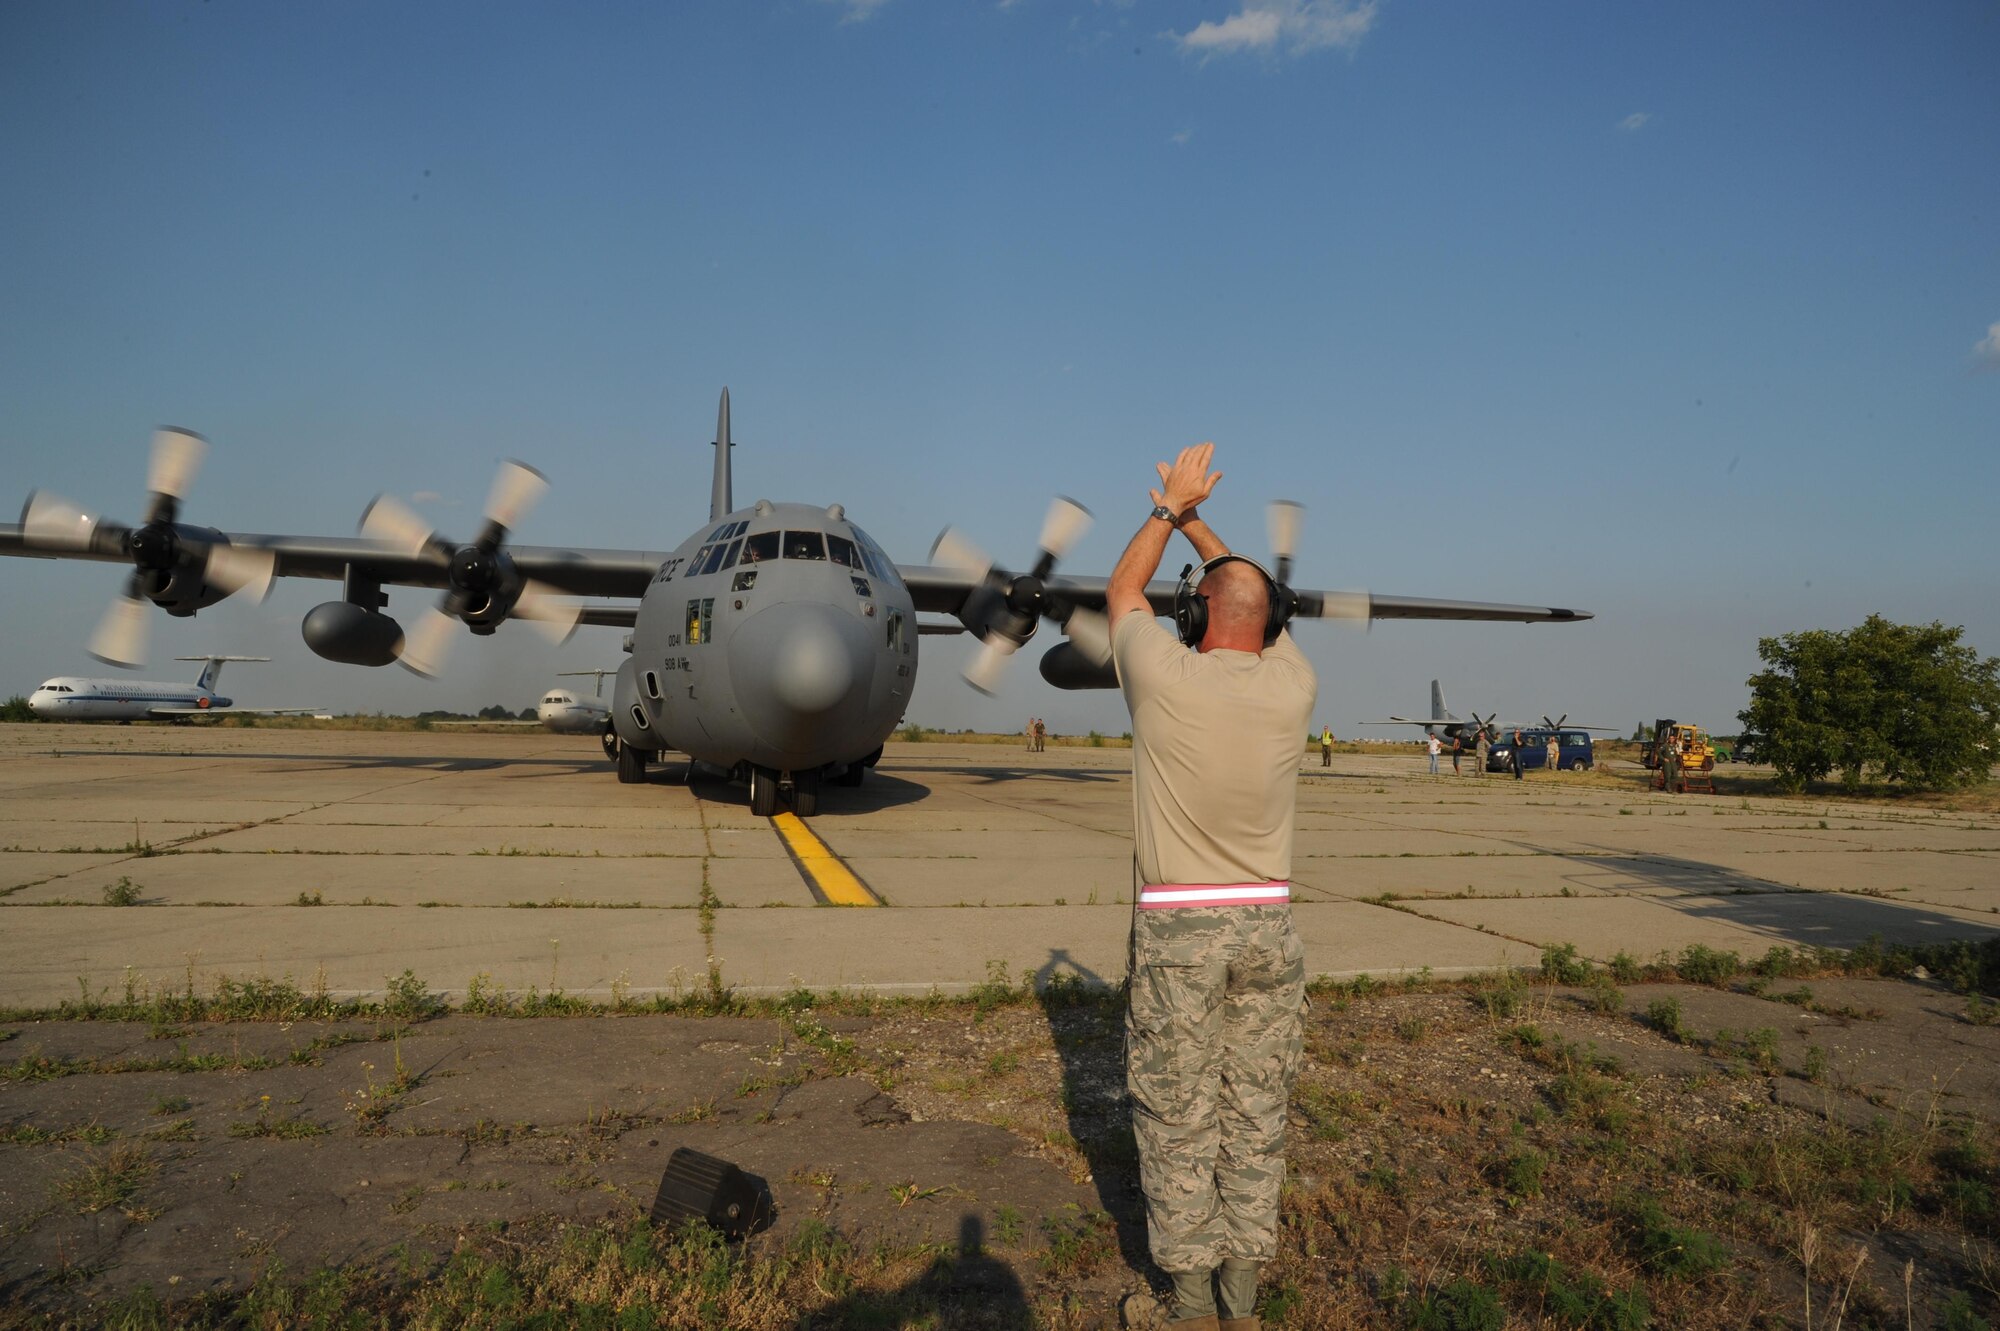 Chief Master Sgt. Leon Alexander directs the aircraft to stop in its parking place on arrival at Otopeni Air Base, Romania.  Otopeni is located on the outskirts of Bucharest.